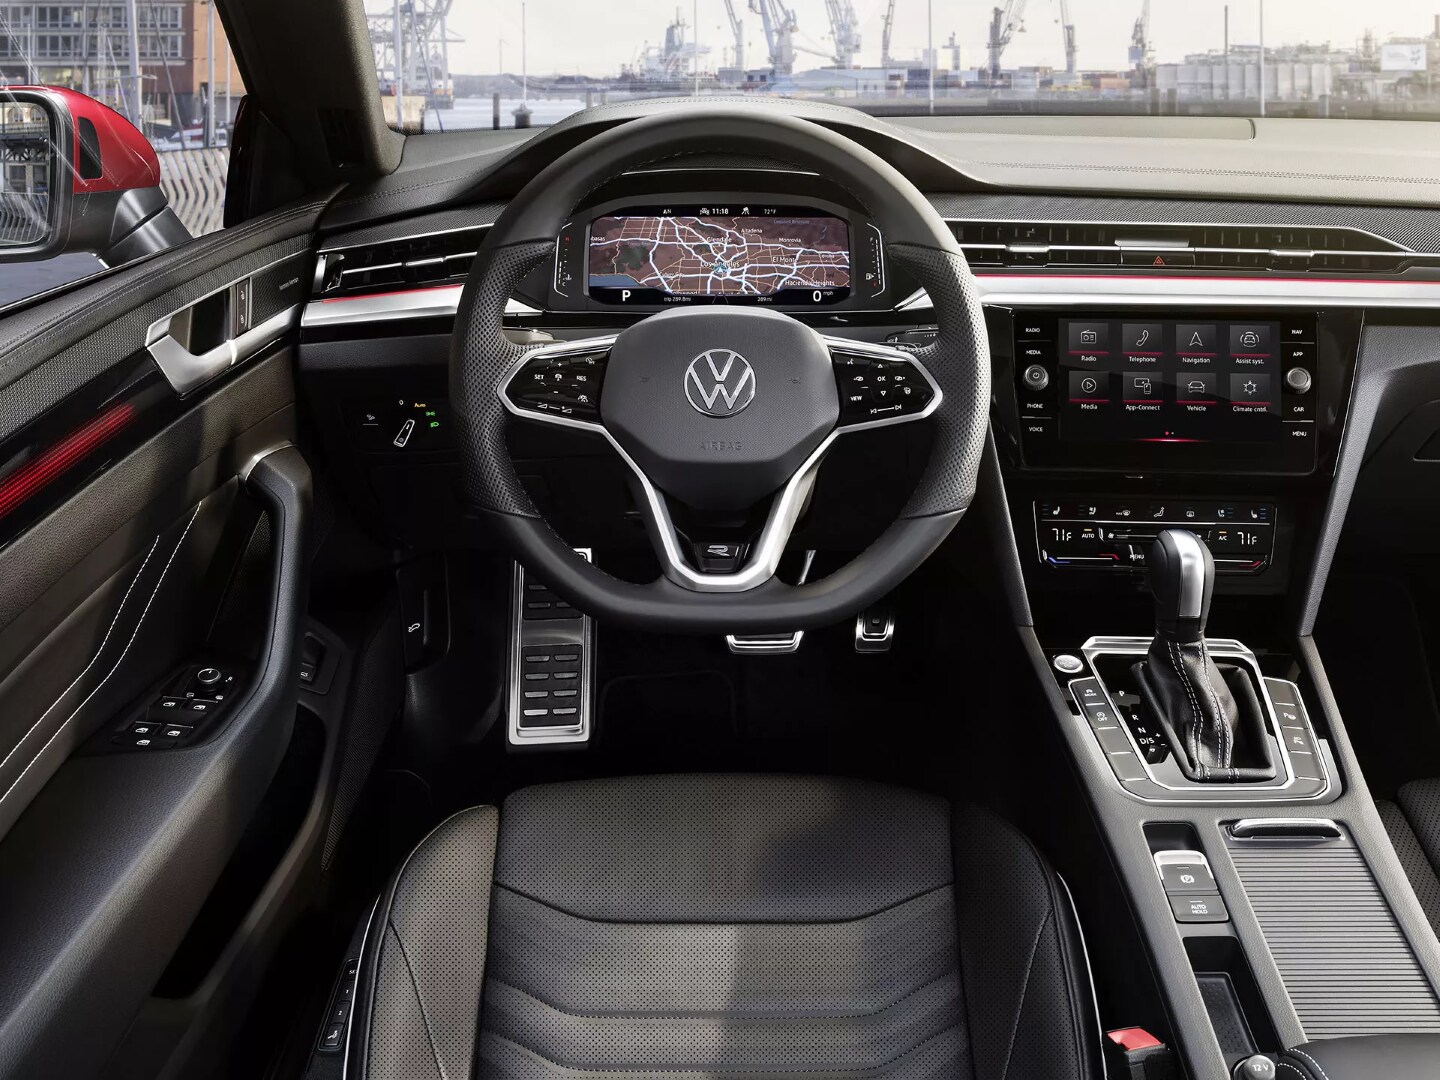 2023 VW Arteon driver assistance and media technology